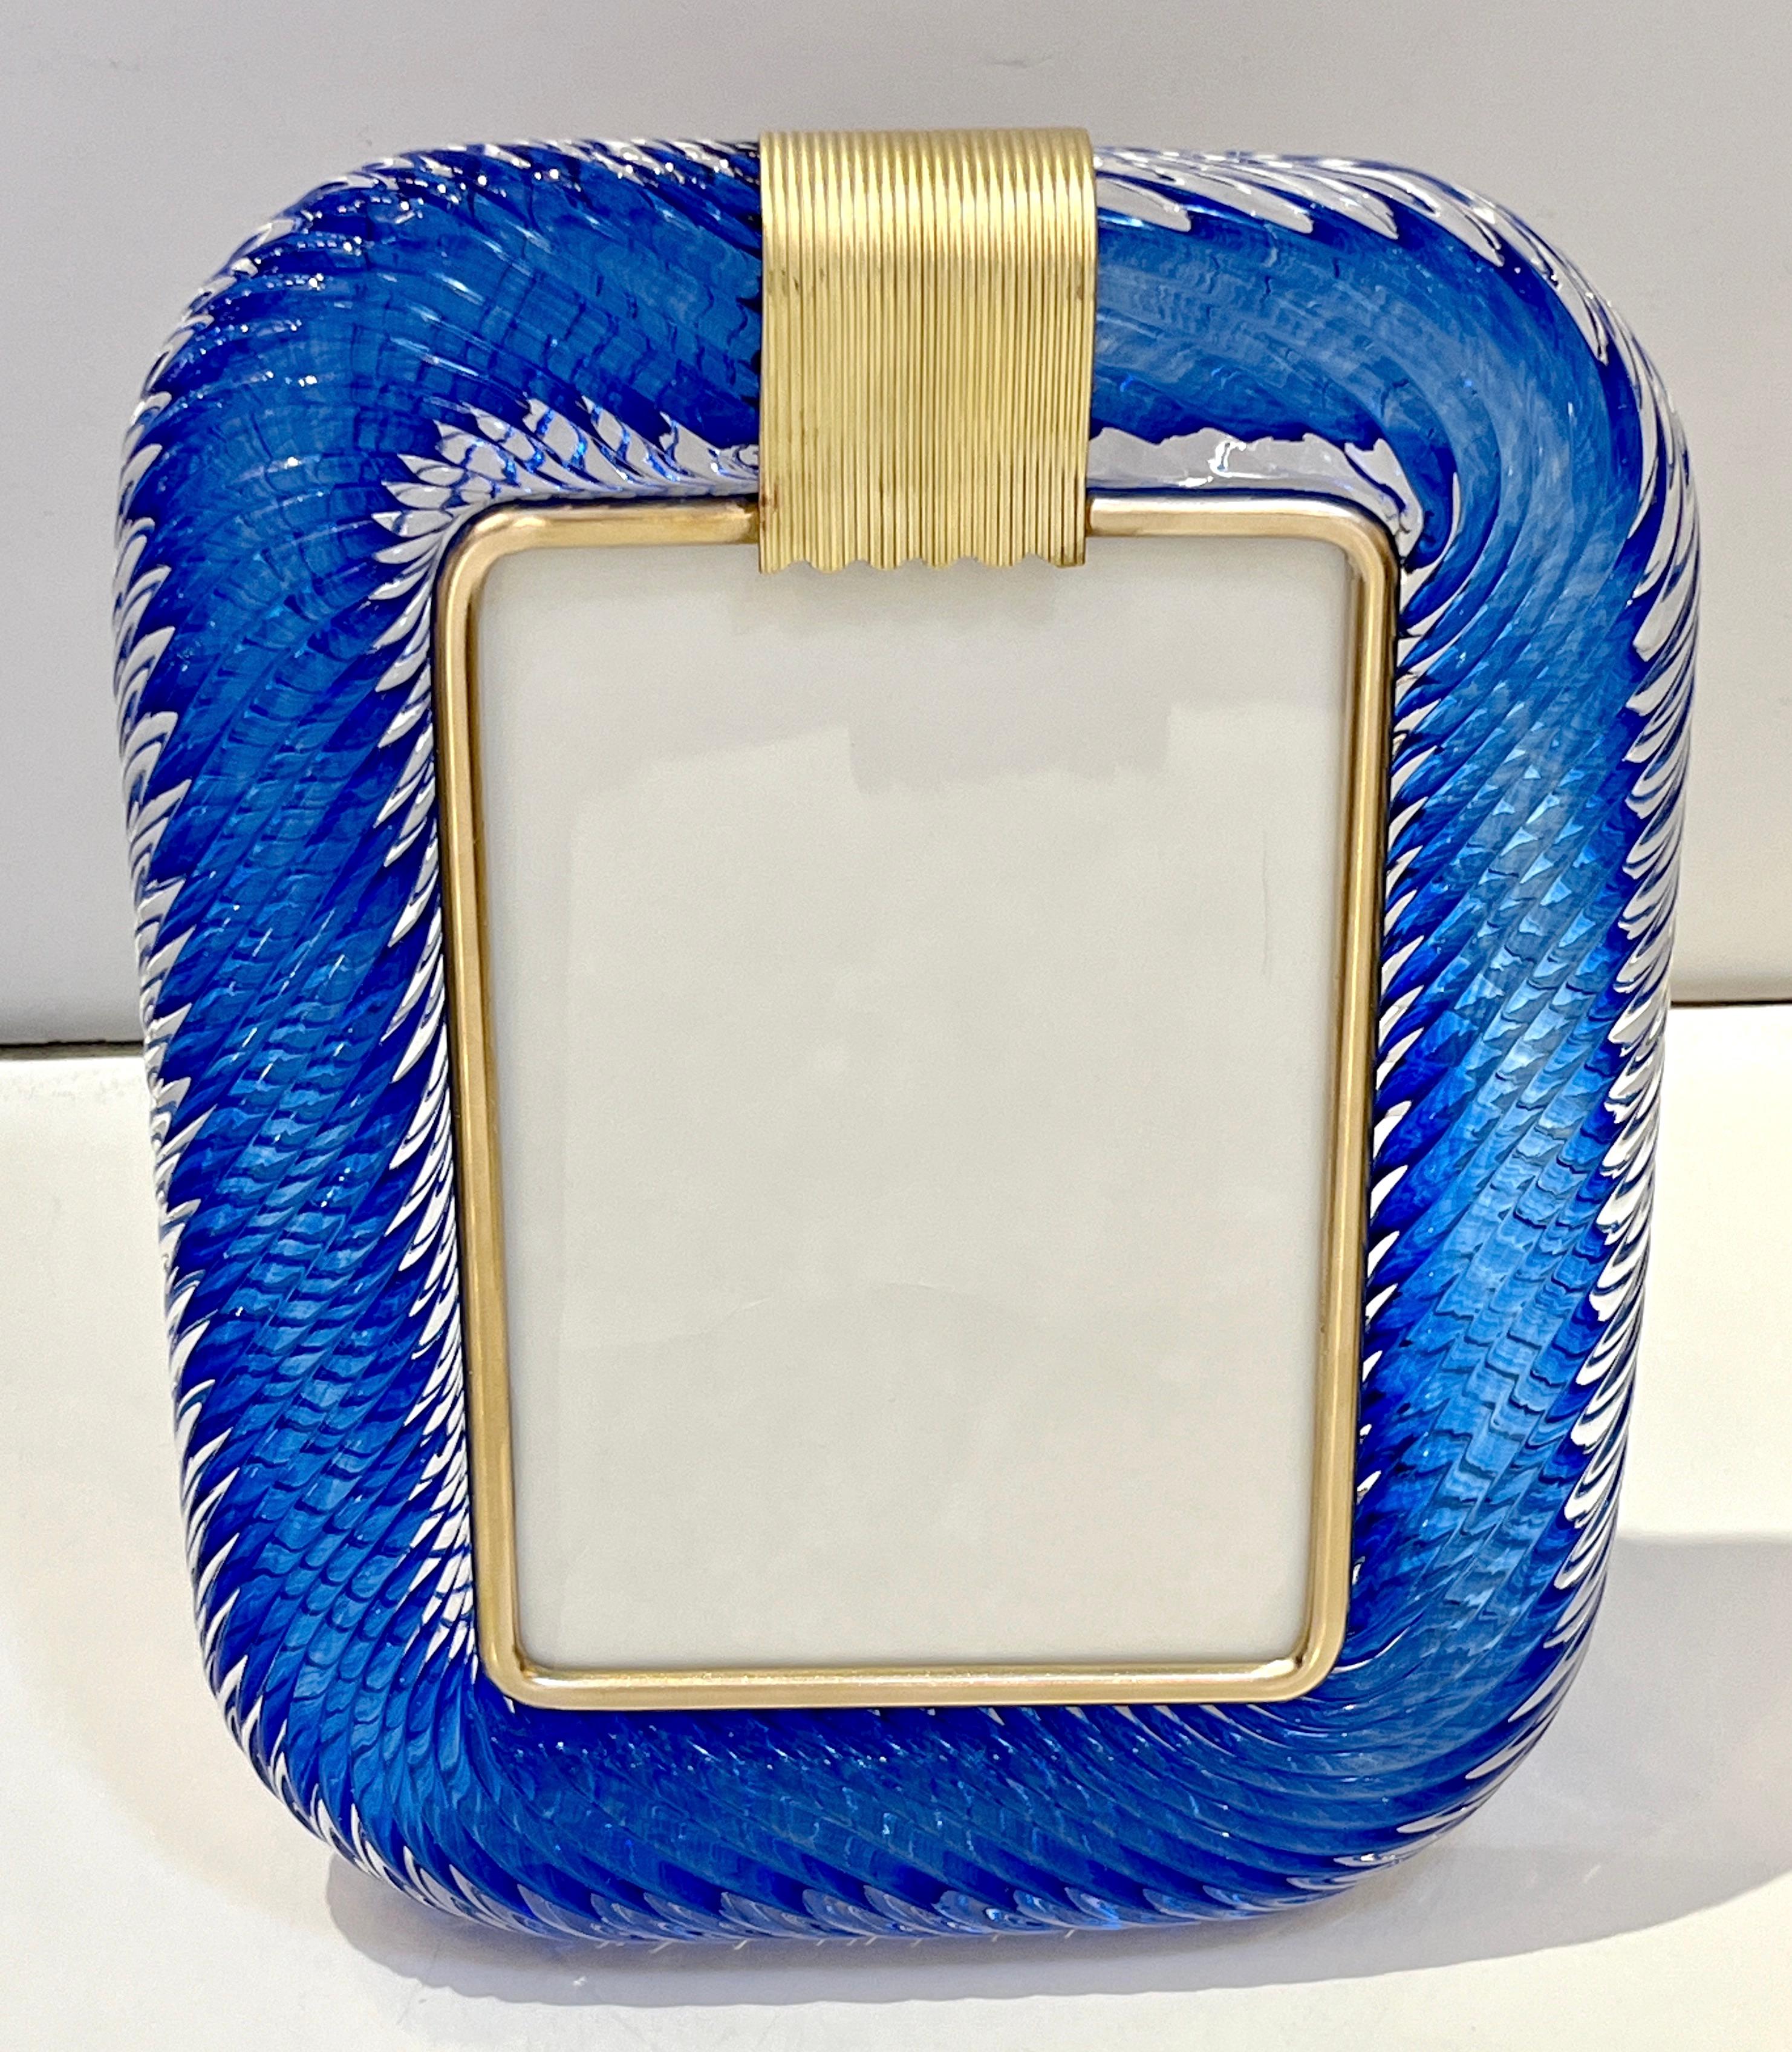 A sophisticated Venetian modern design vertical photo frame in thick blown Murano glass worked in a luscious deep blue jewel color, by Barovier Toso, signed piece. The elegant texture of the tightly twisted glass frame in the Torchon technique of